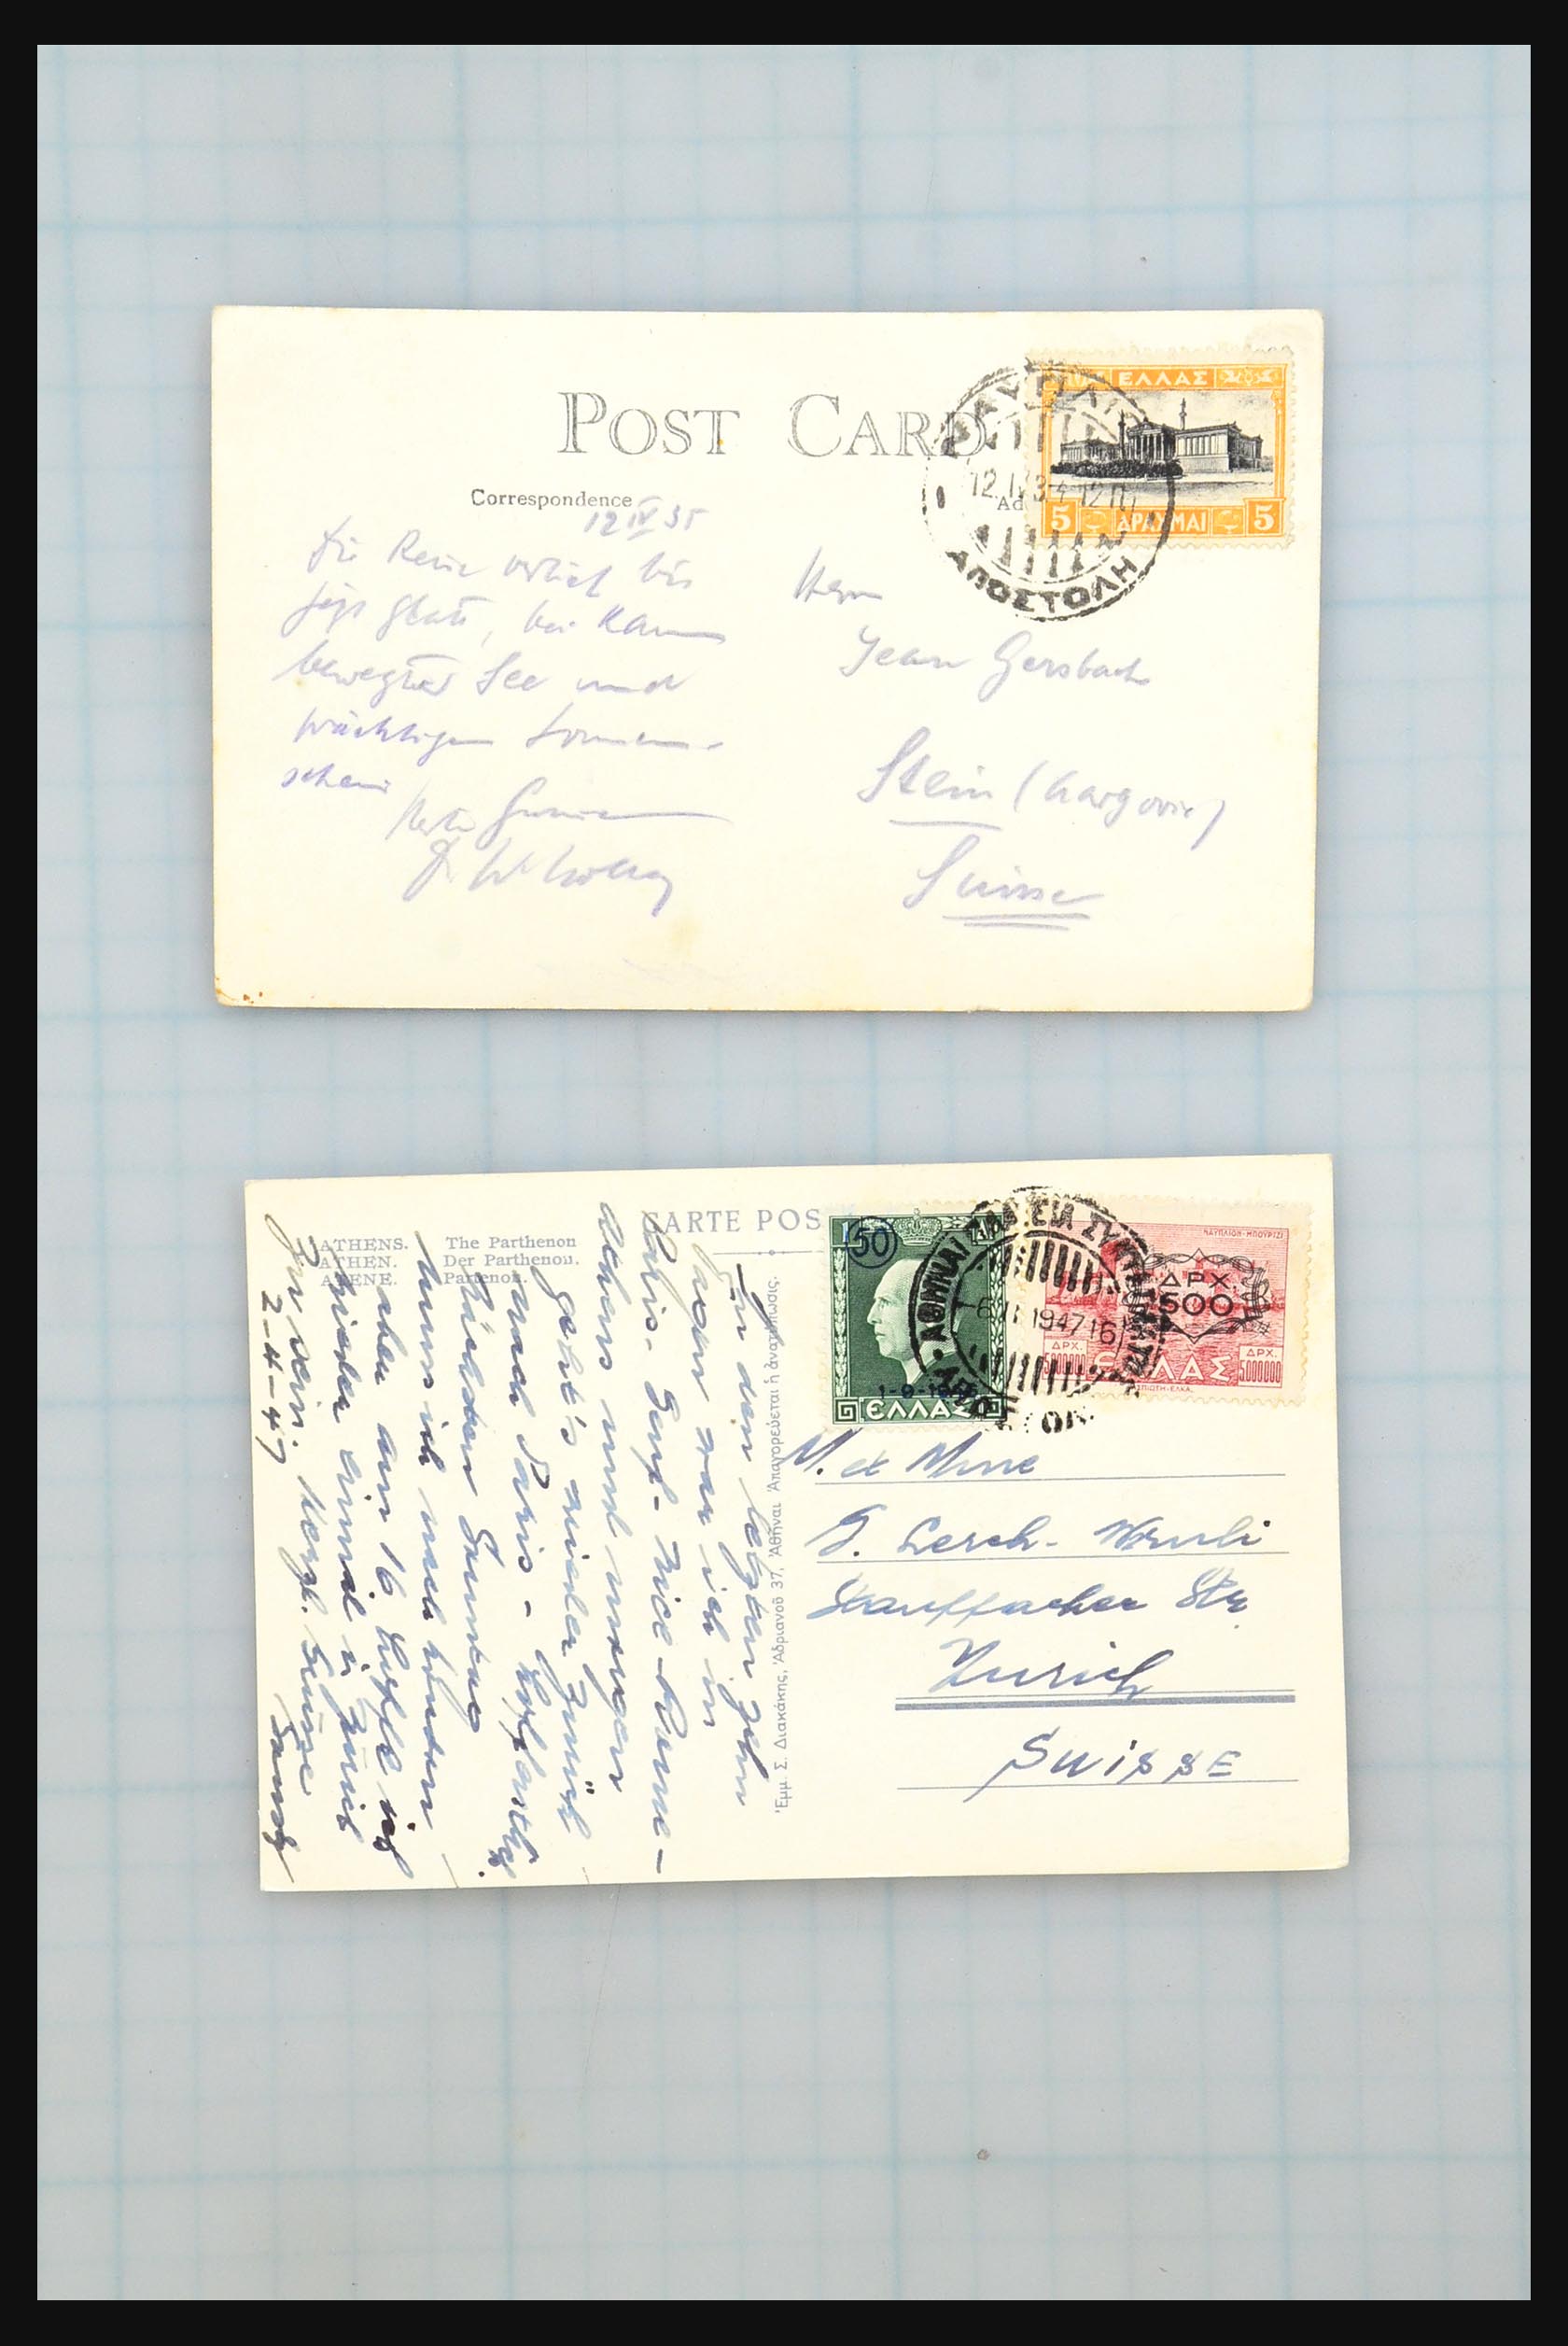 31358 090 - 31358 Portugal/Luxemburg/Greece covers 1880-1960.